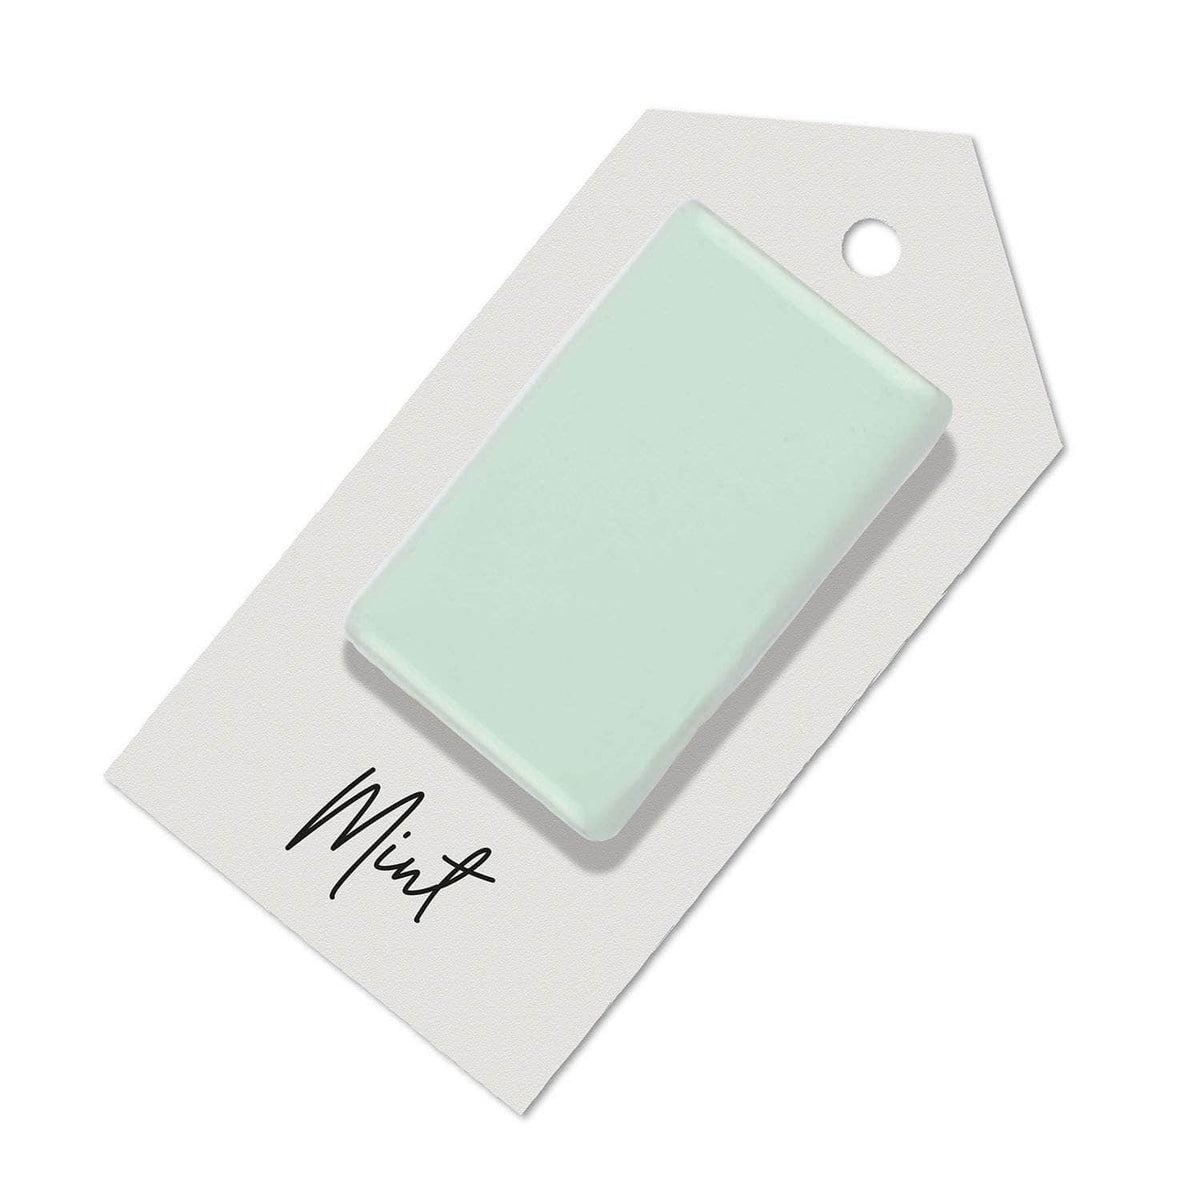 Mint Green sample for Aga range cooker re-enamelling &amp; reconditioned cookers